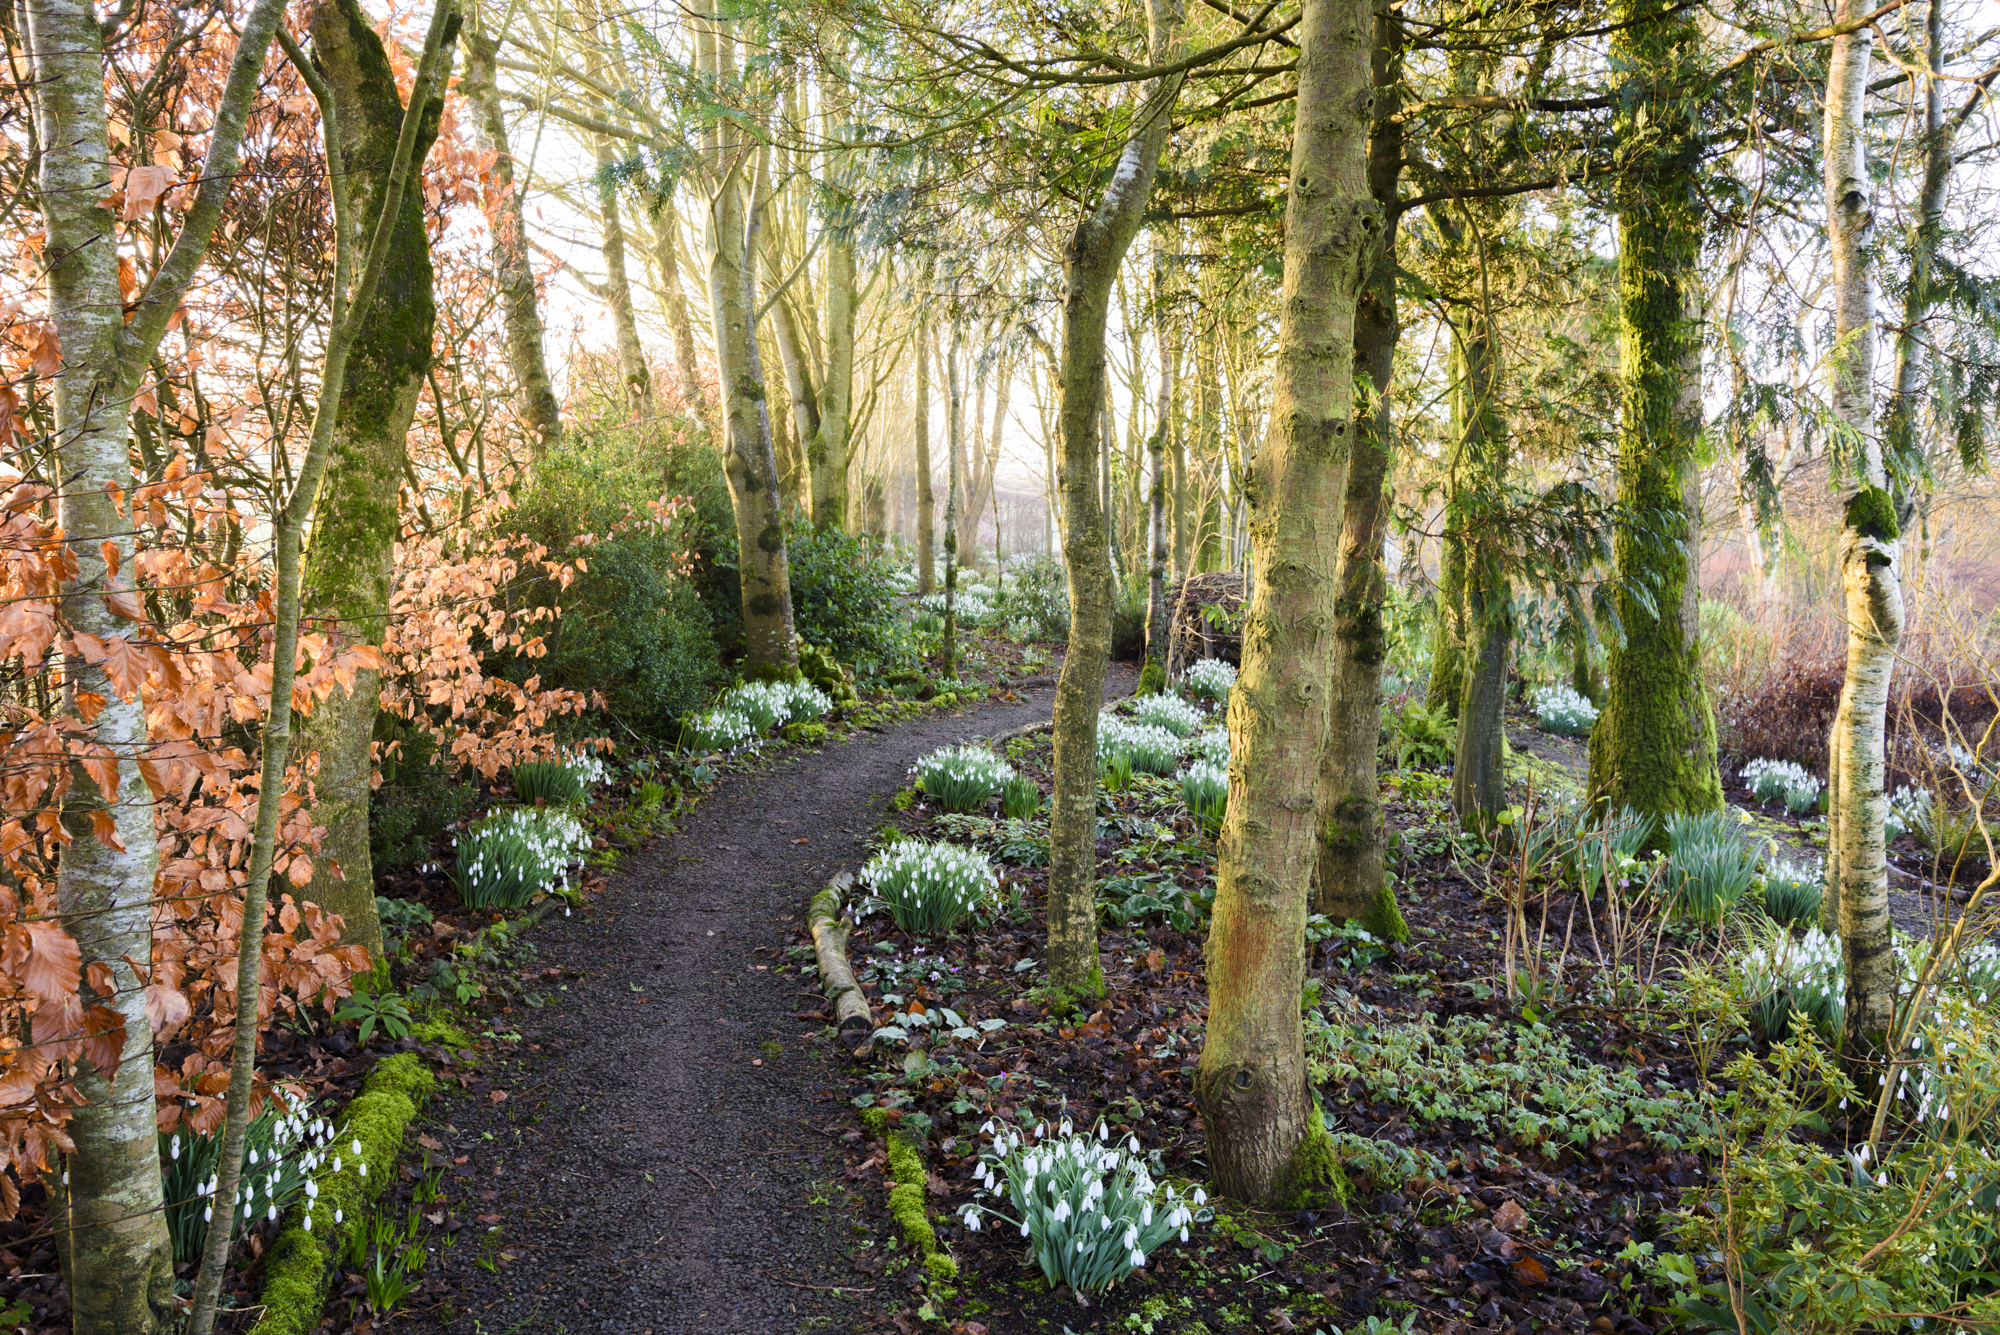 Path edged with clumps of snowdrops at Higher Cherubeer (Carole Drake/NGS/PA)